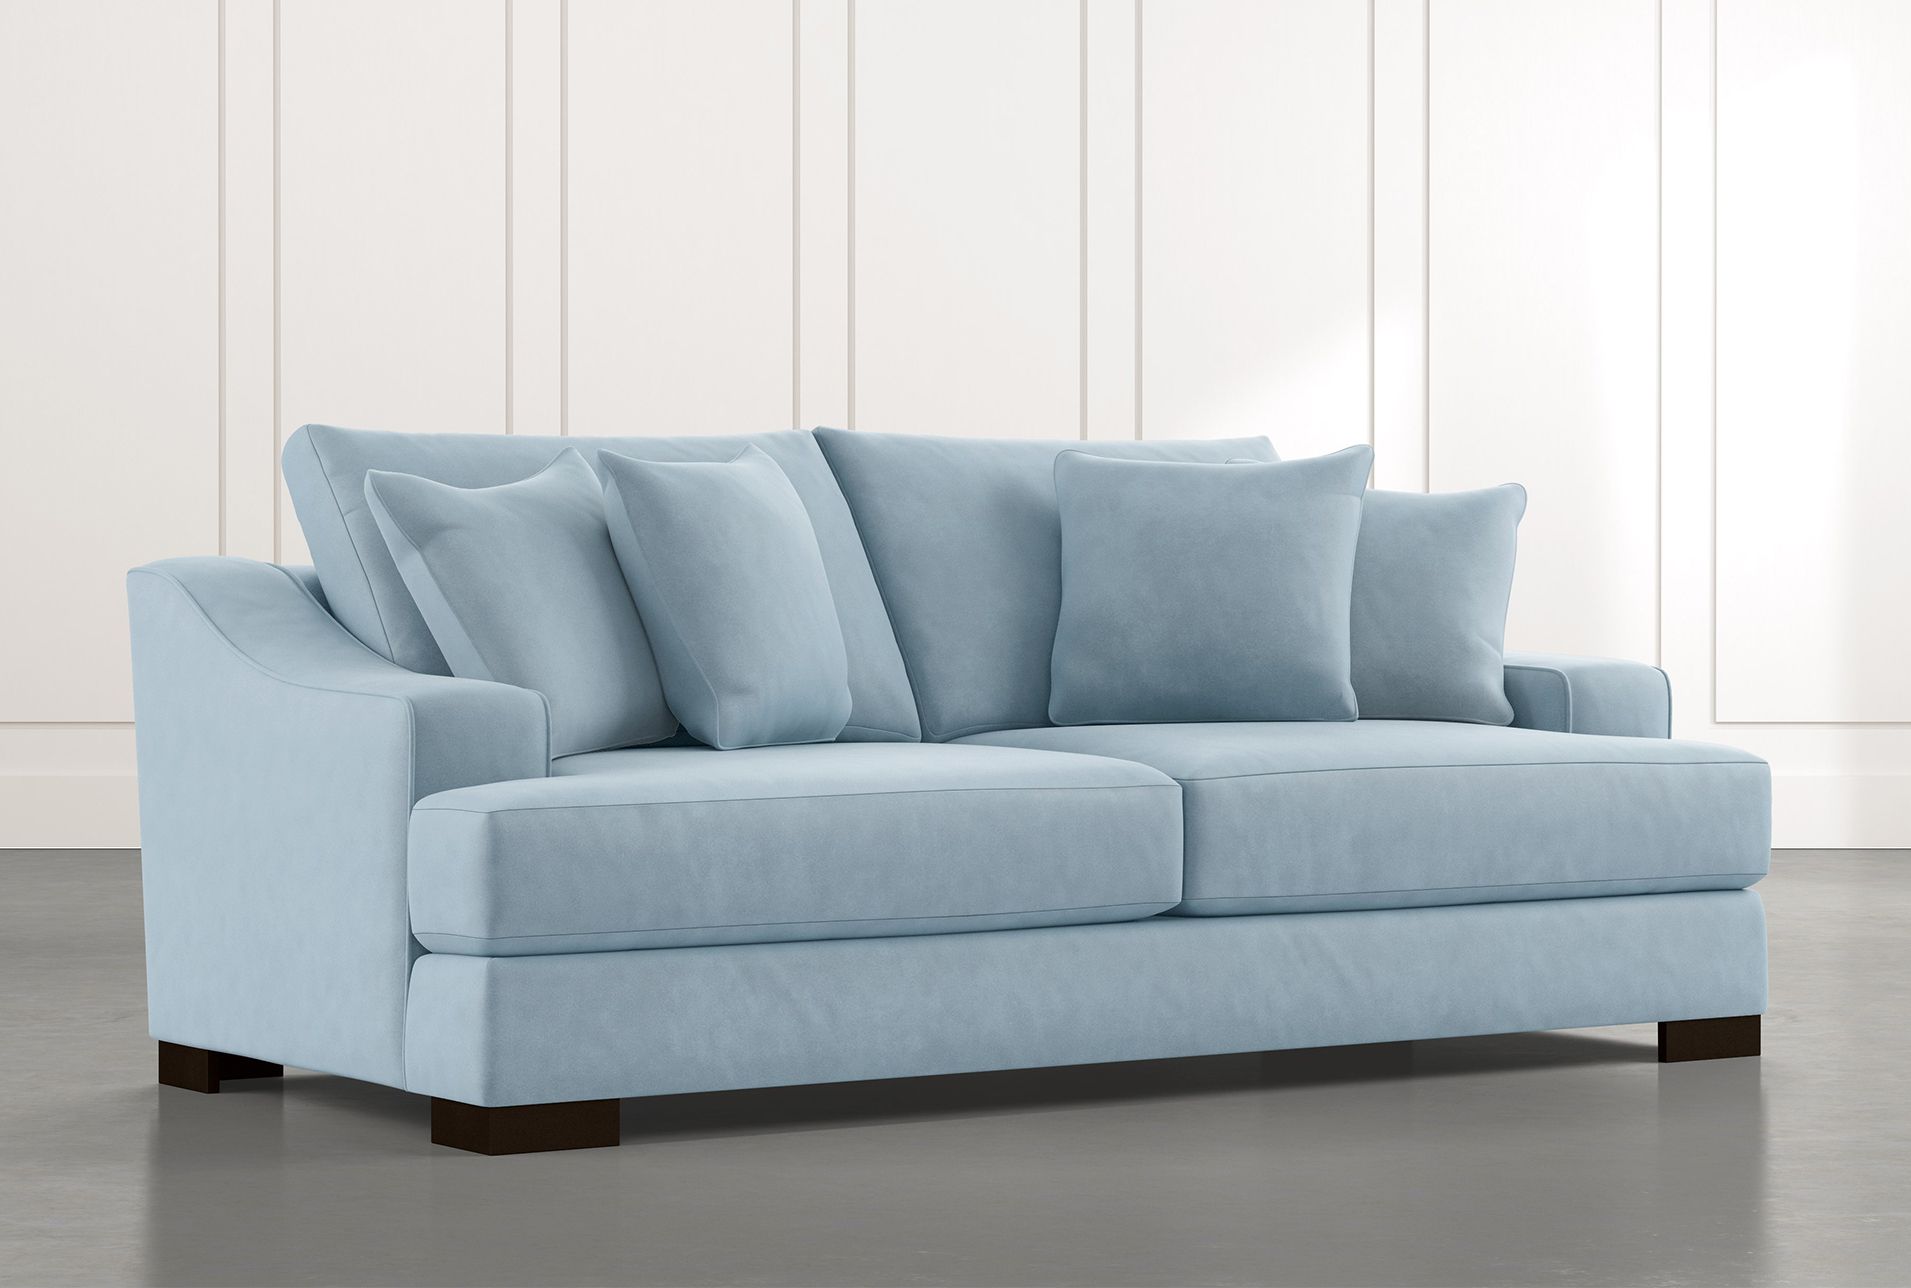 Lodge 96" Light Blue Sofa | Living Spaces Pertaining To Modern Blue Linen Sofas (Gallery 9 of 20)